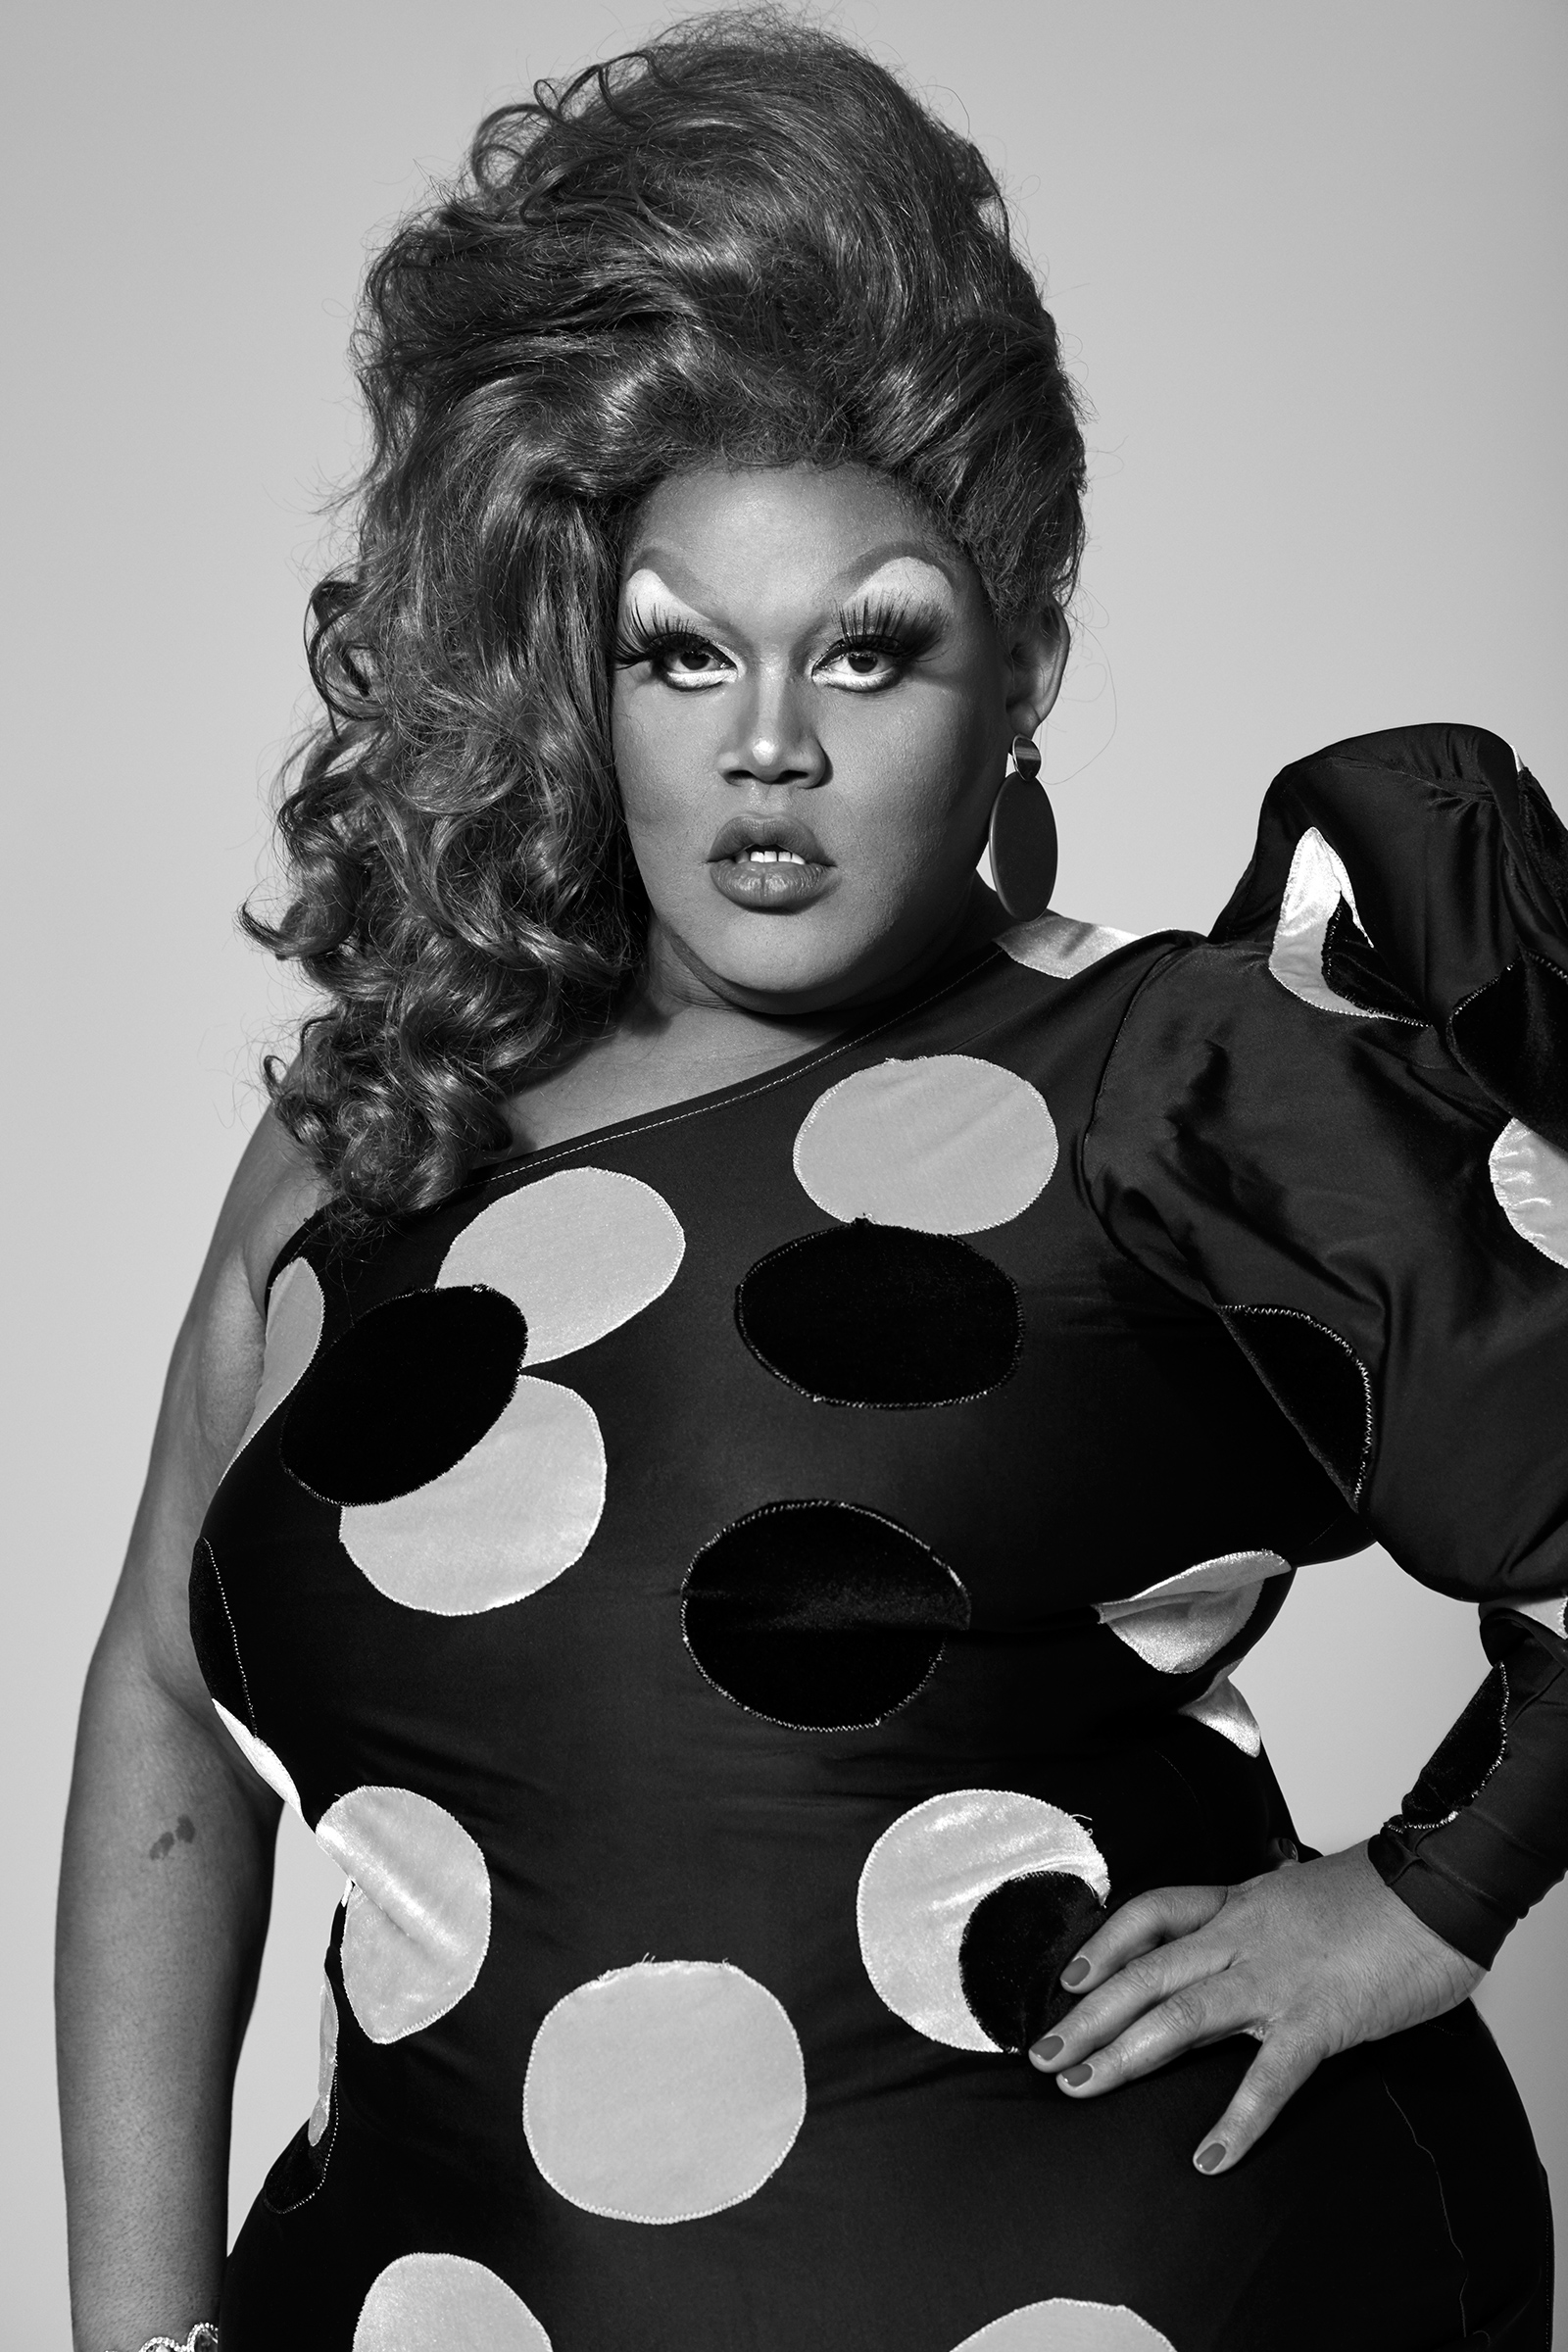 "We can’t forget about Compton’s Cafeteria, where, before Stonewall, there was an uprising of trans women who were being mistreated. That was an era of queer people saying 'No more.' There’s so much rich history out there that we’re a part of." — Merrie Cherry, a drag performer who created the Brooklyn Nightlife Awards. (Collier Schorr)